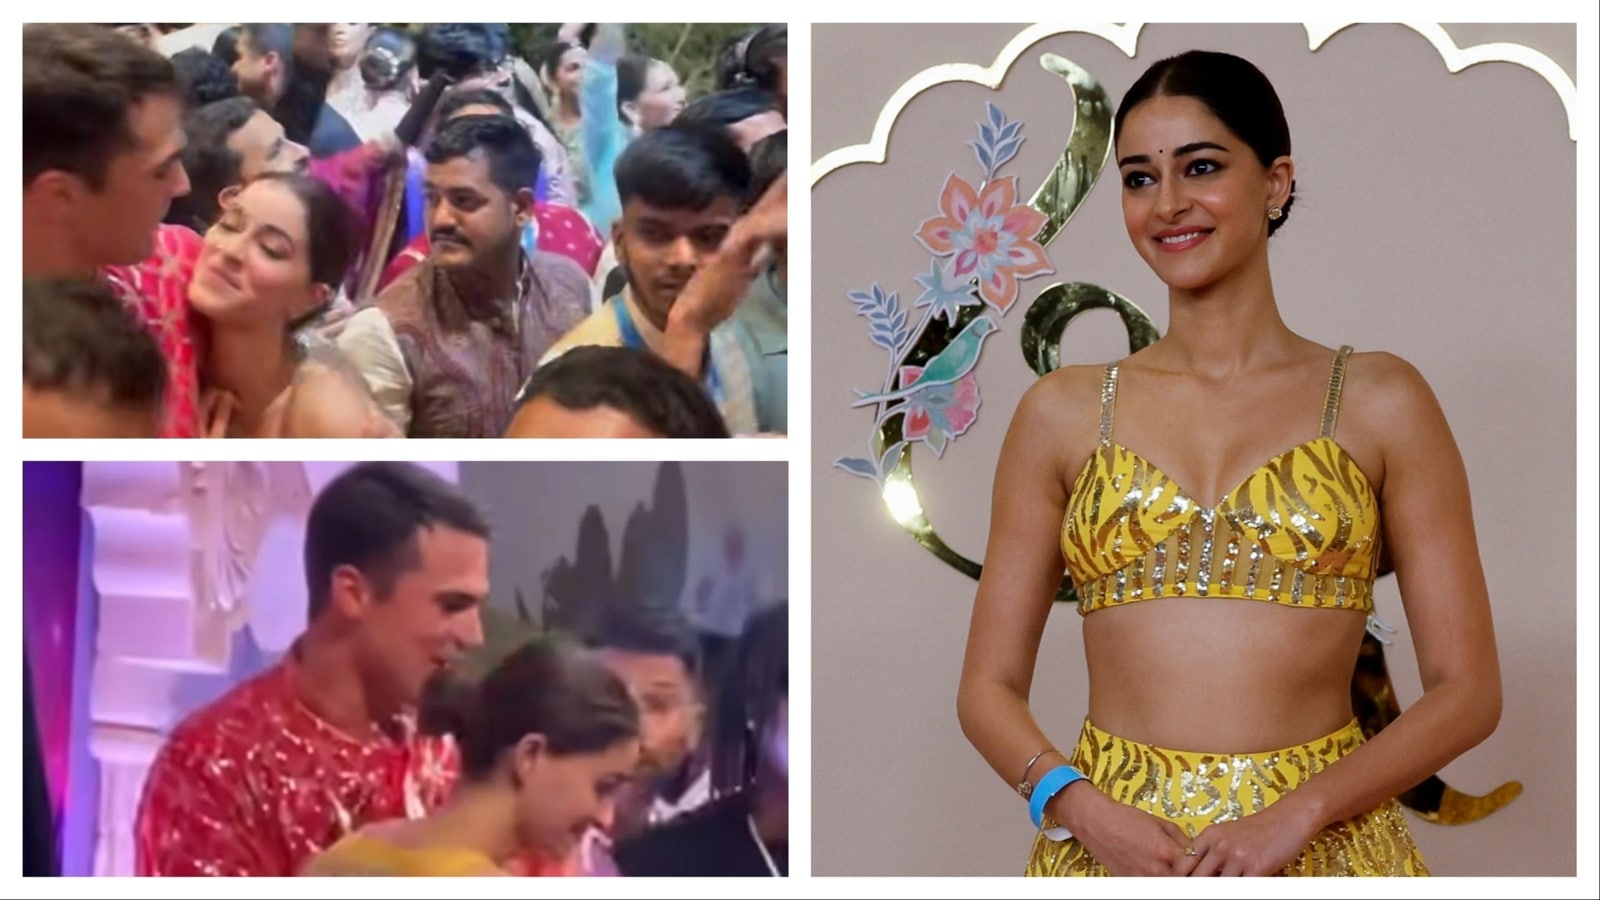 Ananya Panday finds love again? Her picture with the mysterious man from the Ambani wedding causes a stir | Bollywood